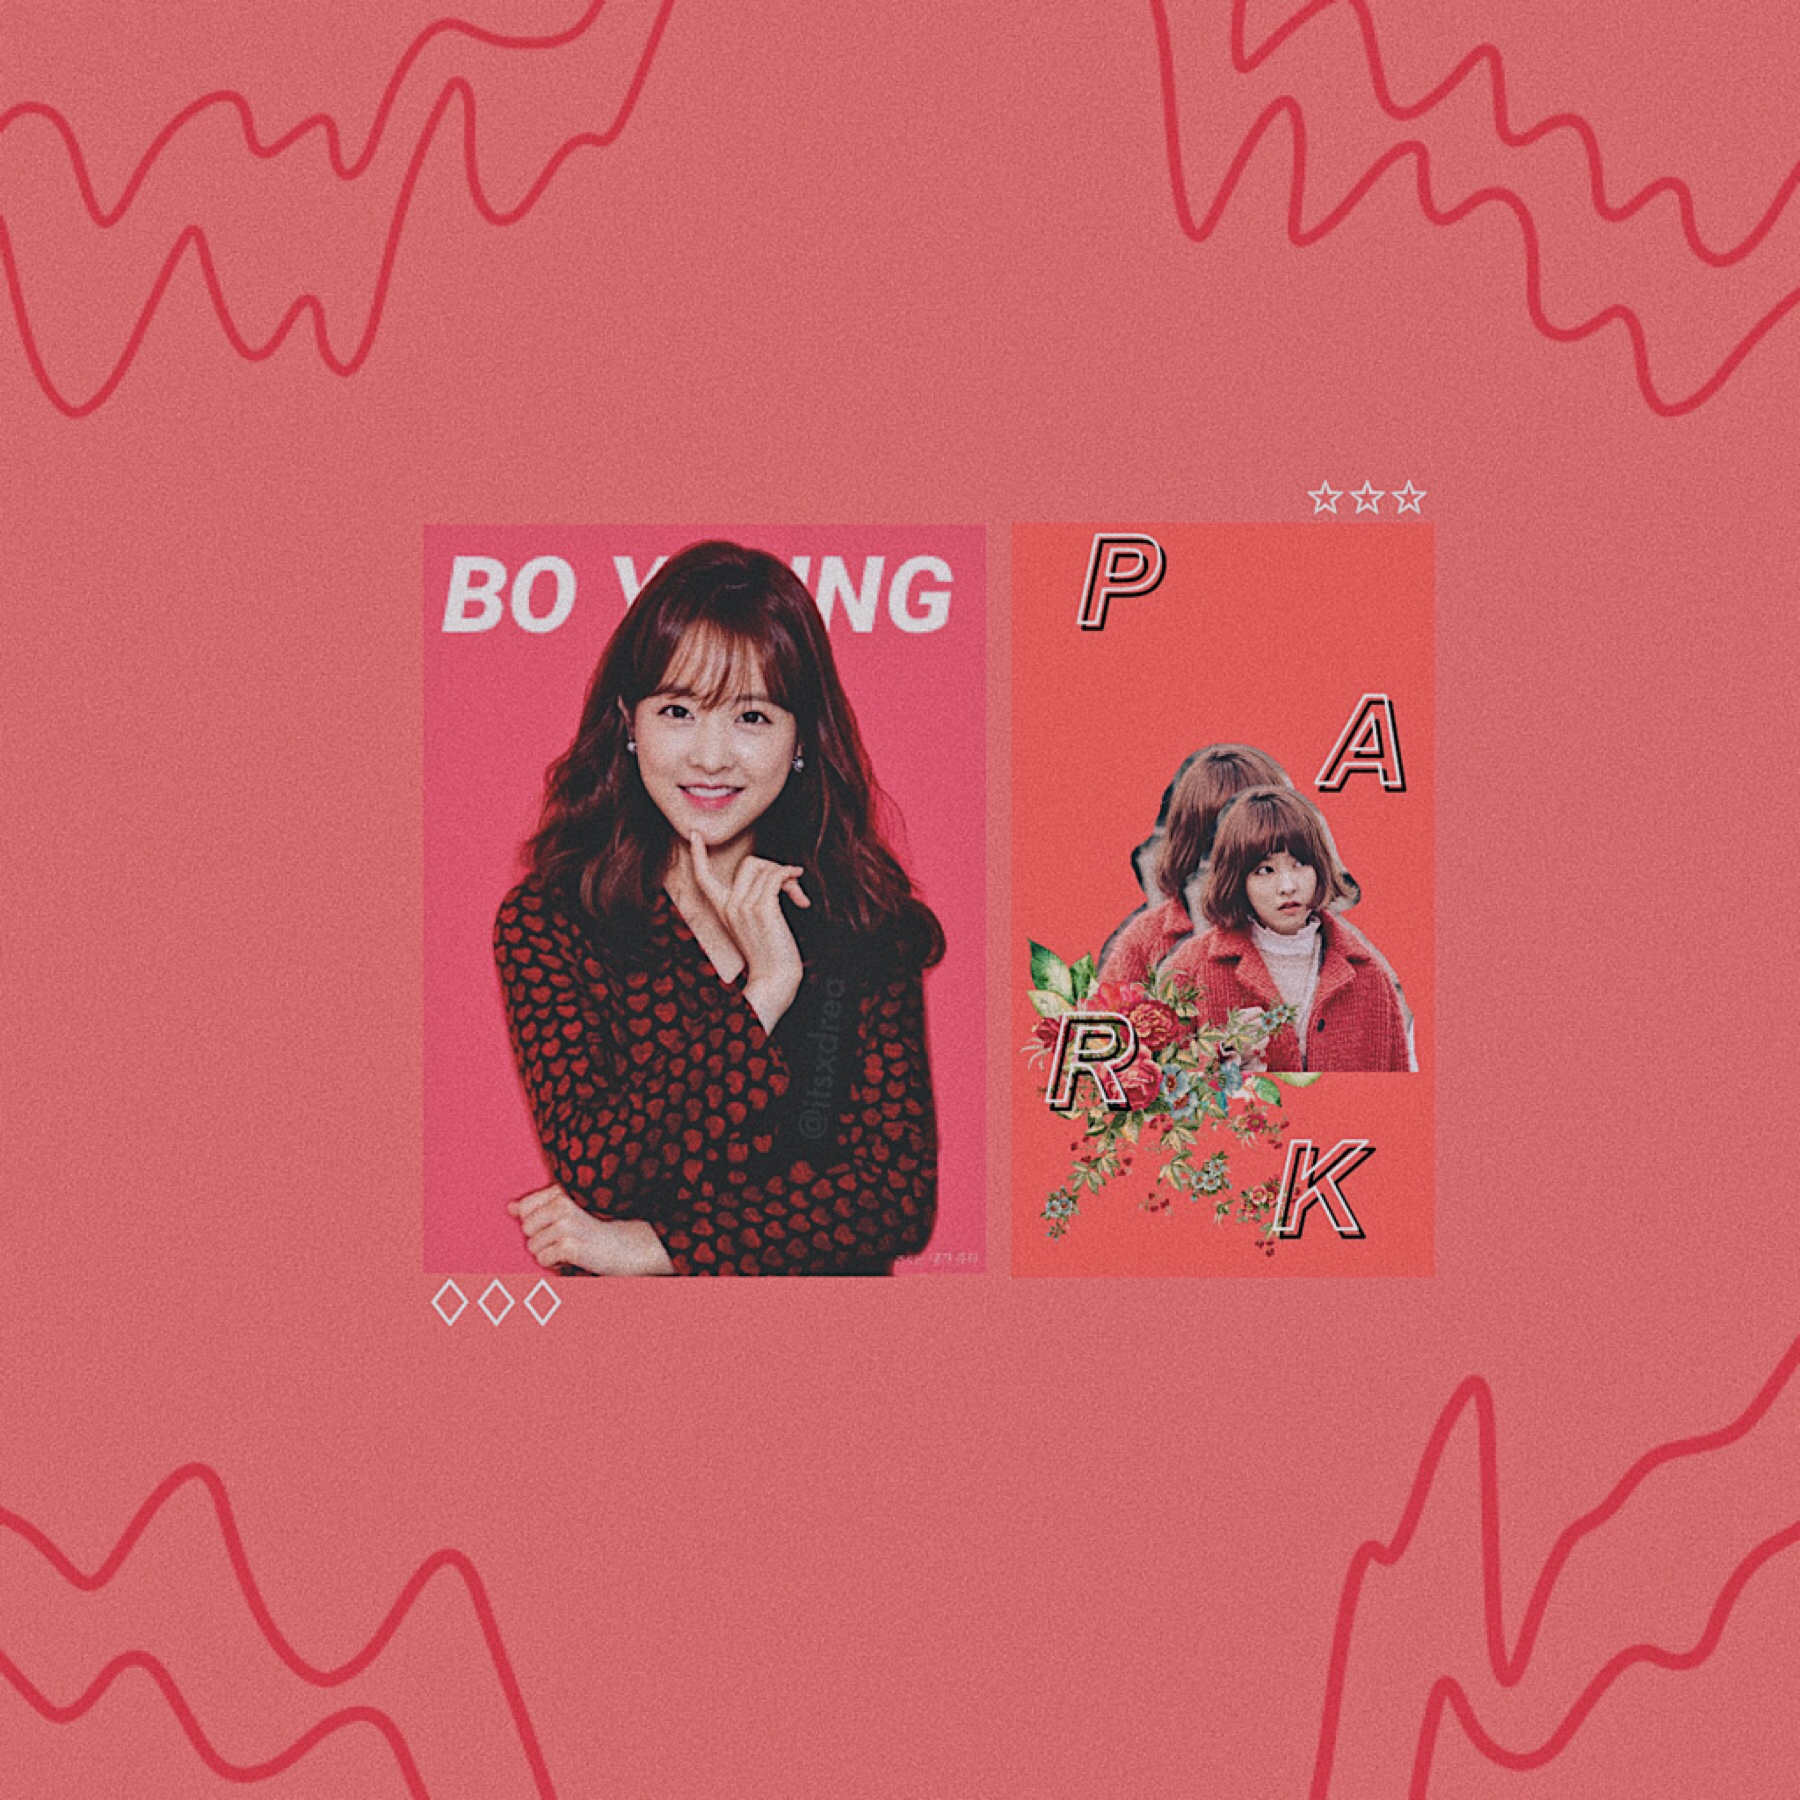 🎟
• park bo young // actress •
i’ve been on an edit streak. this looks kinda boring tho:/ BUT Y’ALL I LOVE HER, SHE’S AMAZING
PS: has ur guys’ wifi been acting sO slow lately?? or just me? 🤔
also pls follow my spotify🥰 (just comment yours for a follow bac